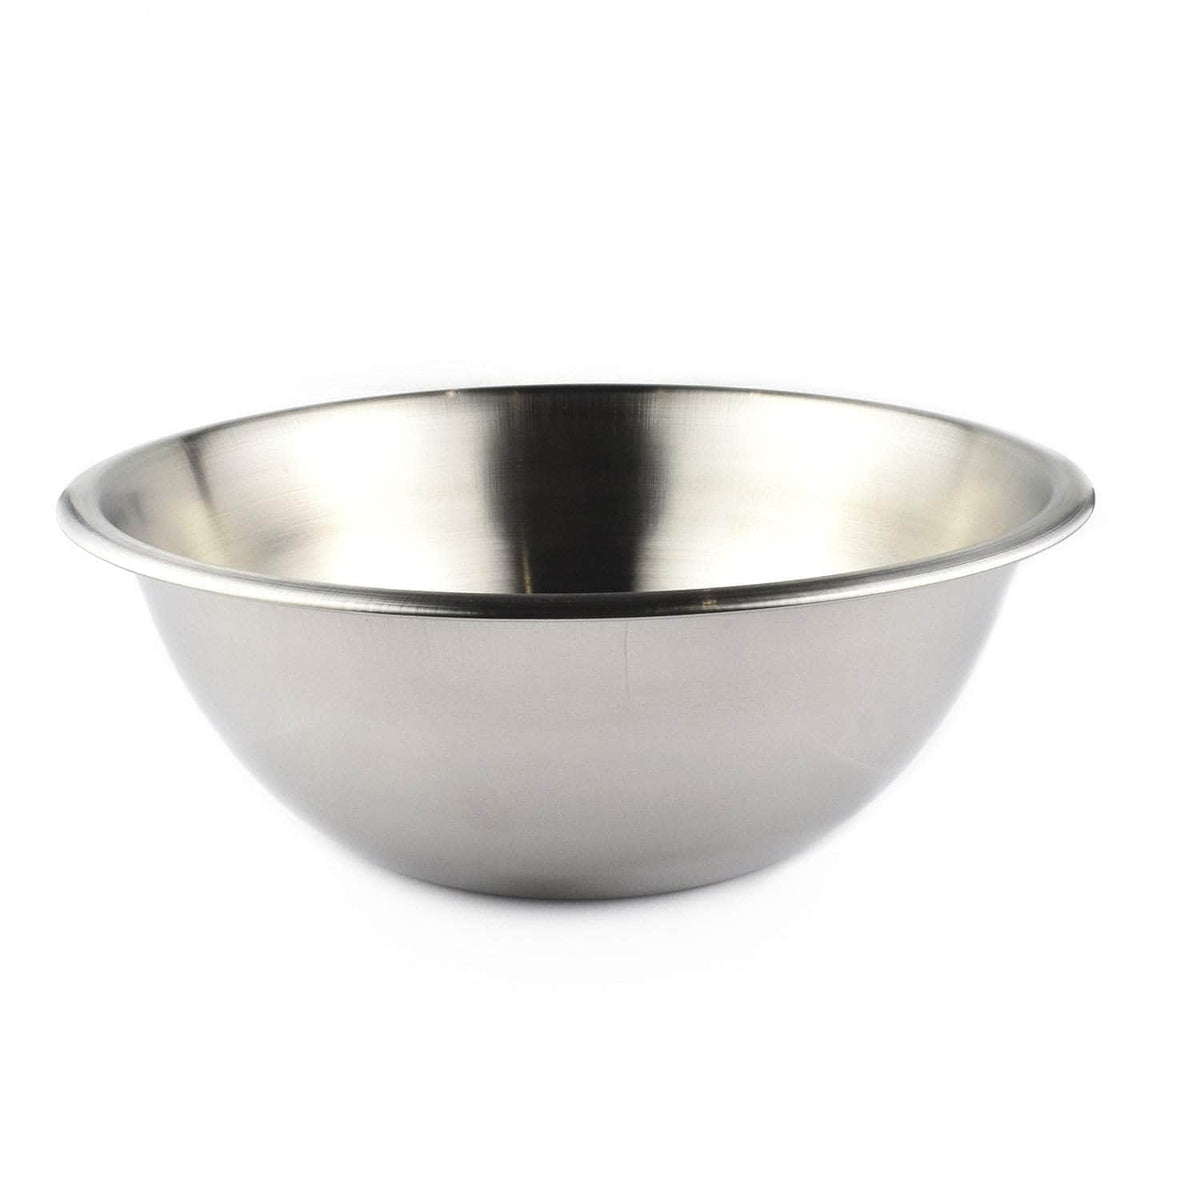 Stainless steel mixing bowl 3 Litres